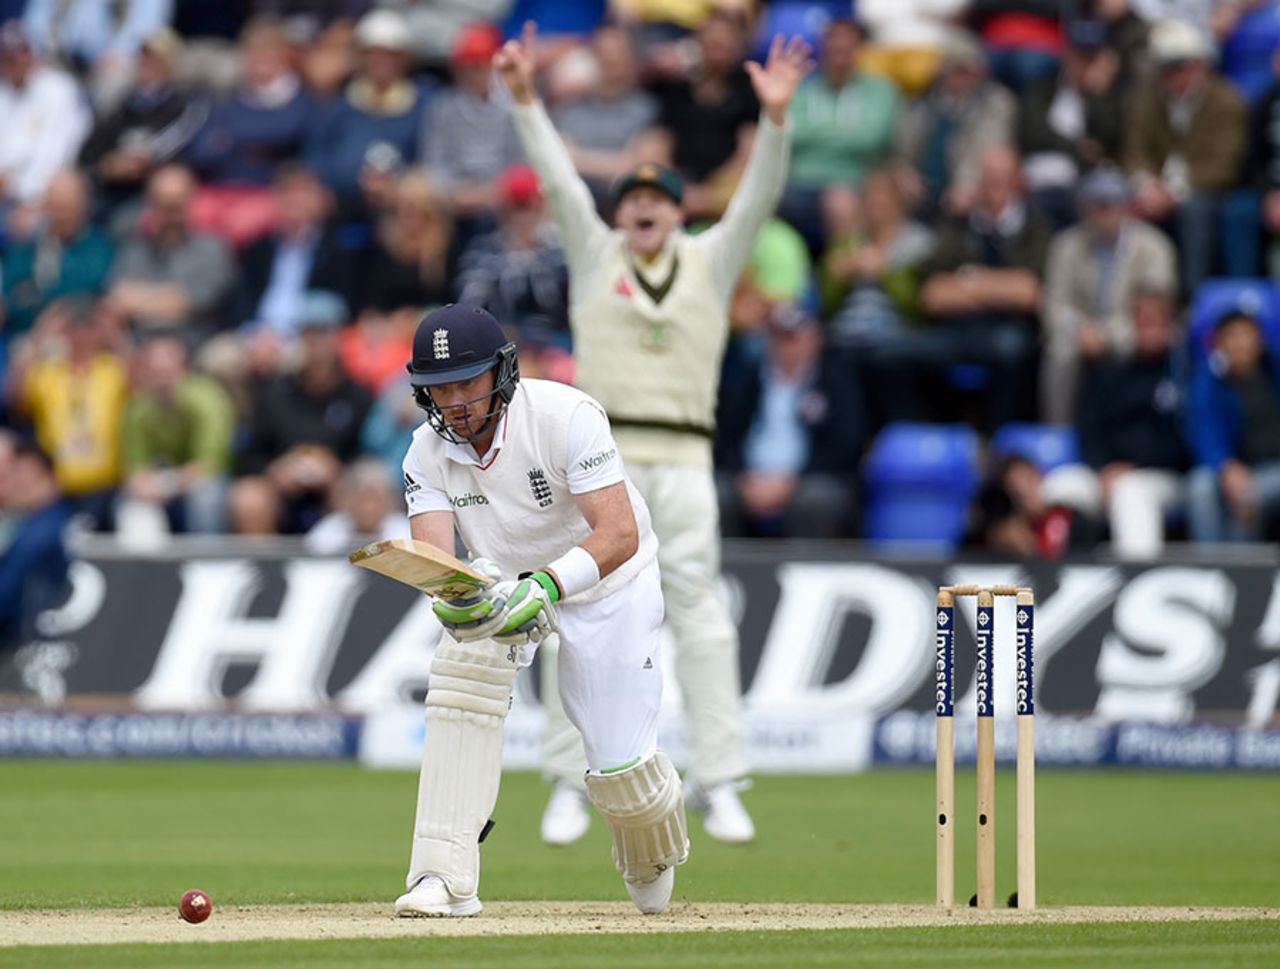 Mitchell Starc trapped Ian Bell with a full, fast inswinger, England v Australia, 1st Investec Ashes Test, Cardiff, 1st day, July 8, 2015